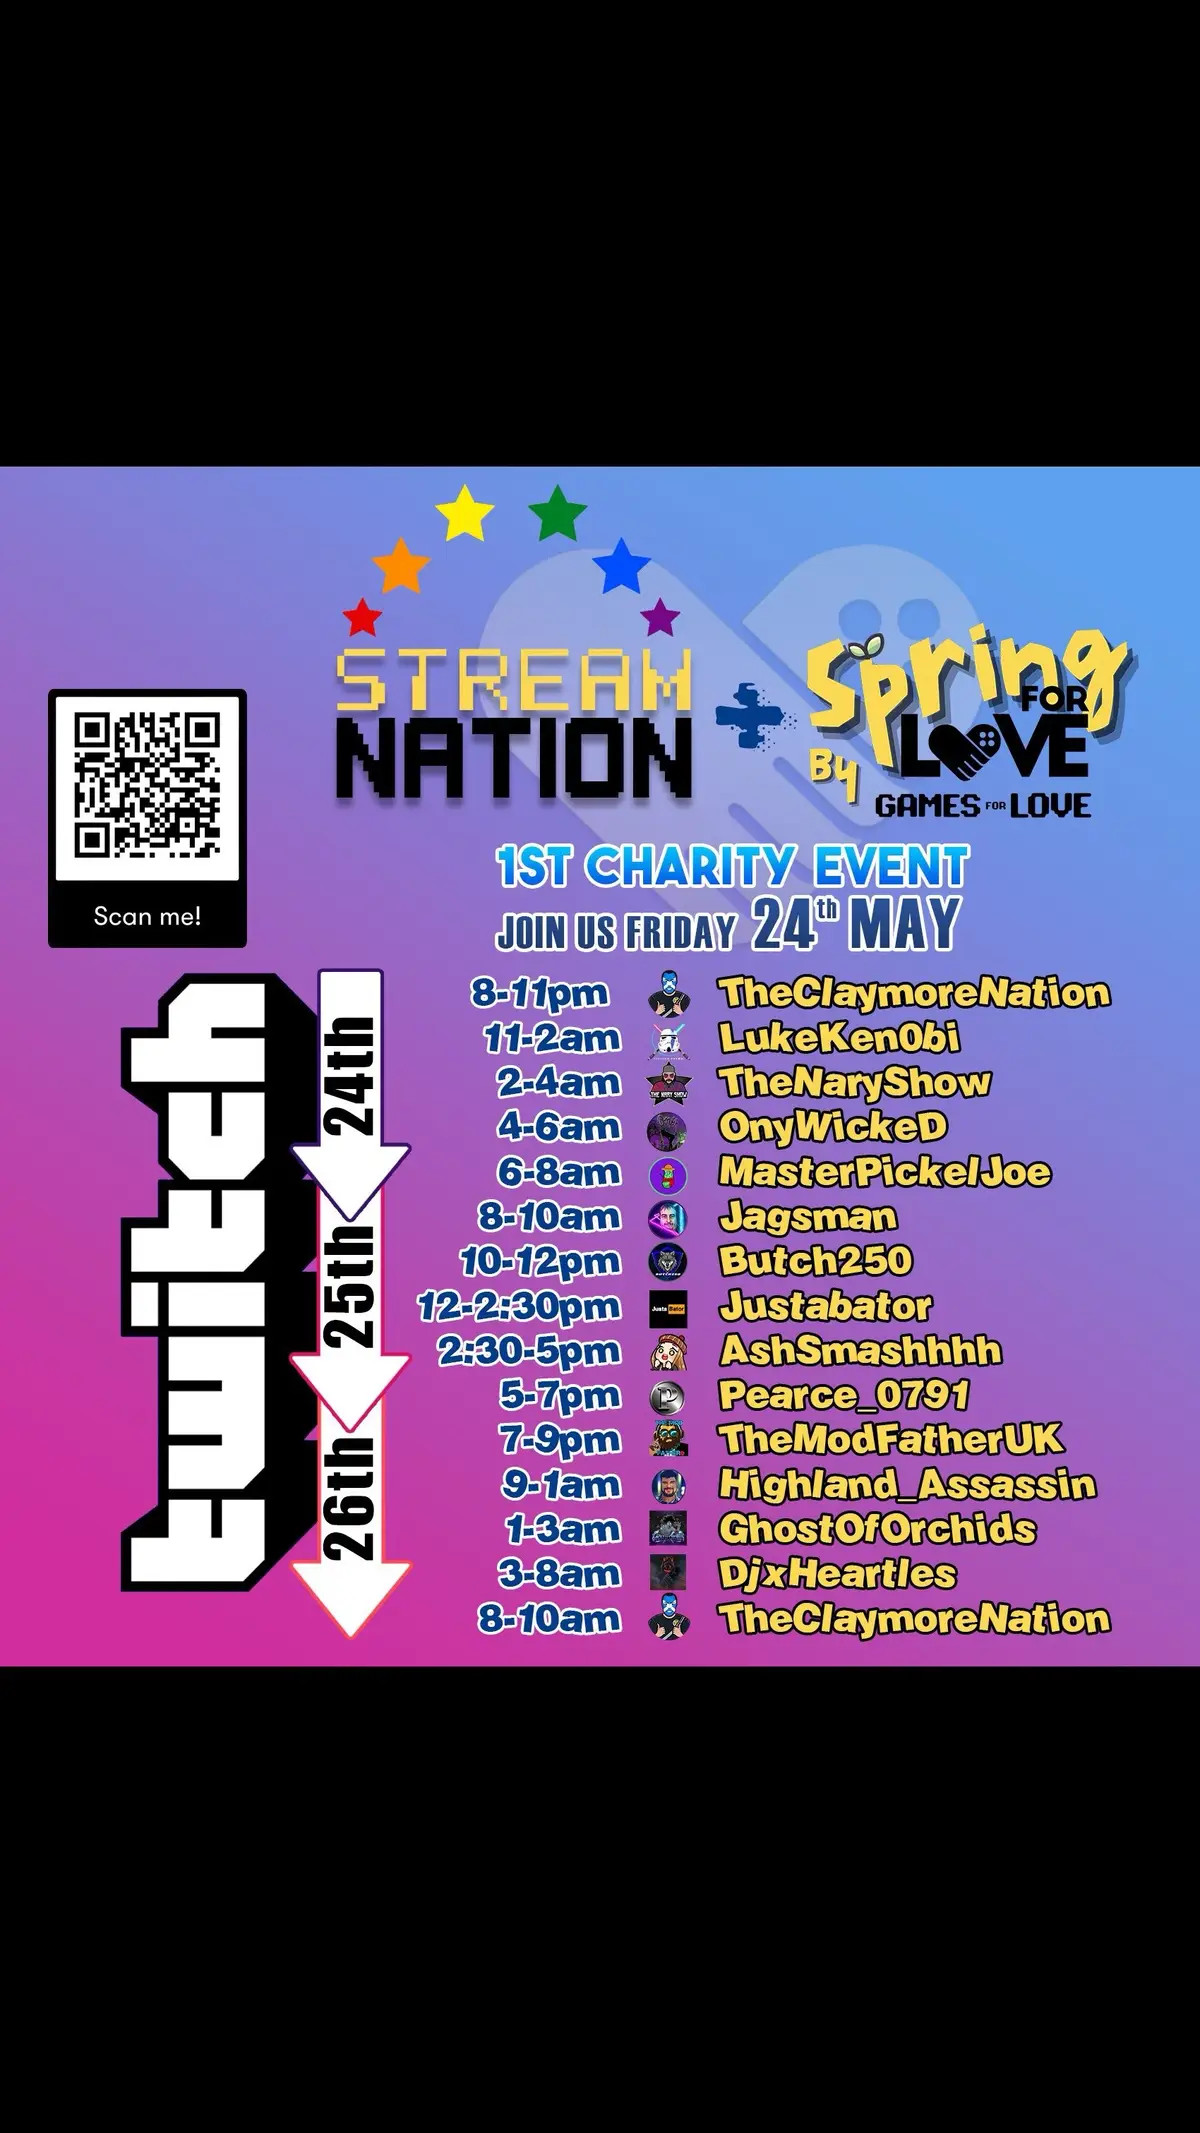 StreamNation Charity Event for @Games for Love #streamnation #twitchstreamer #charity 